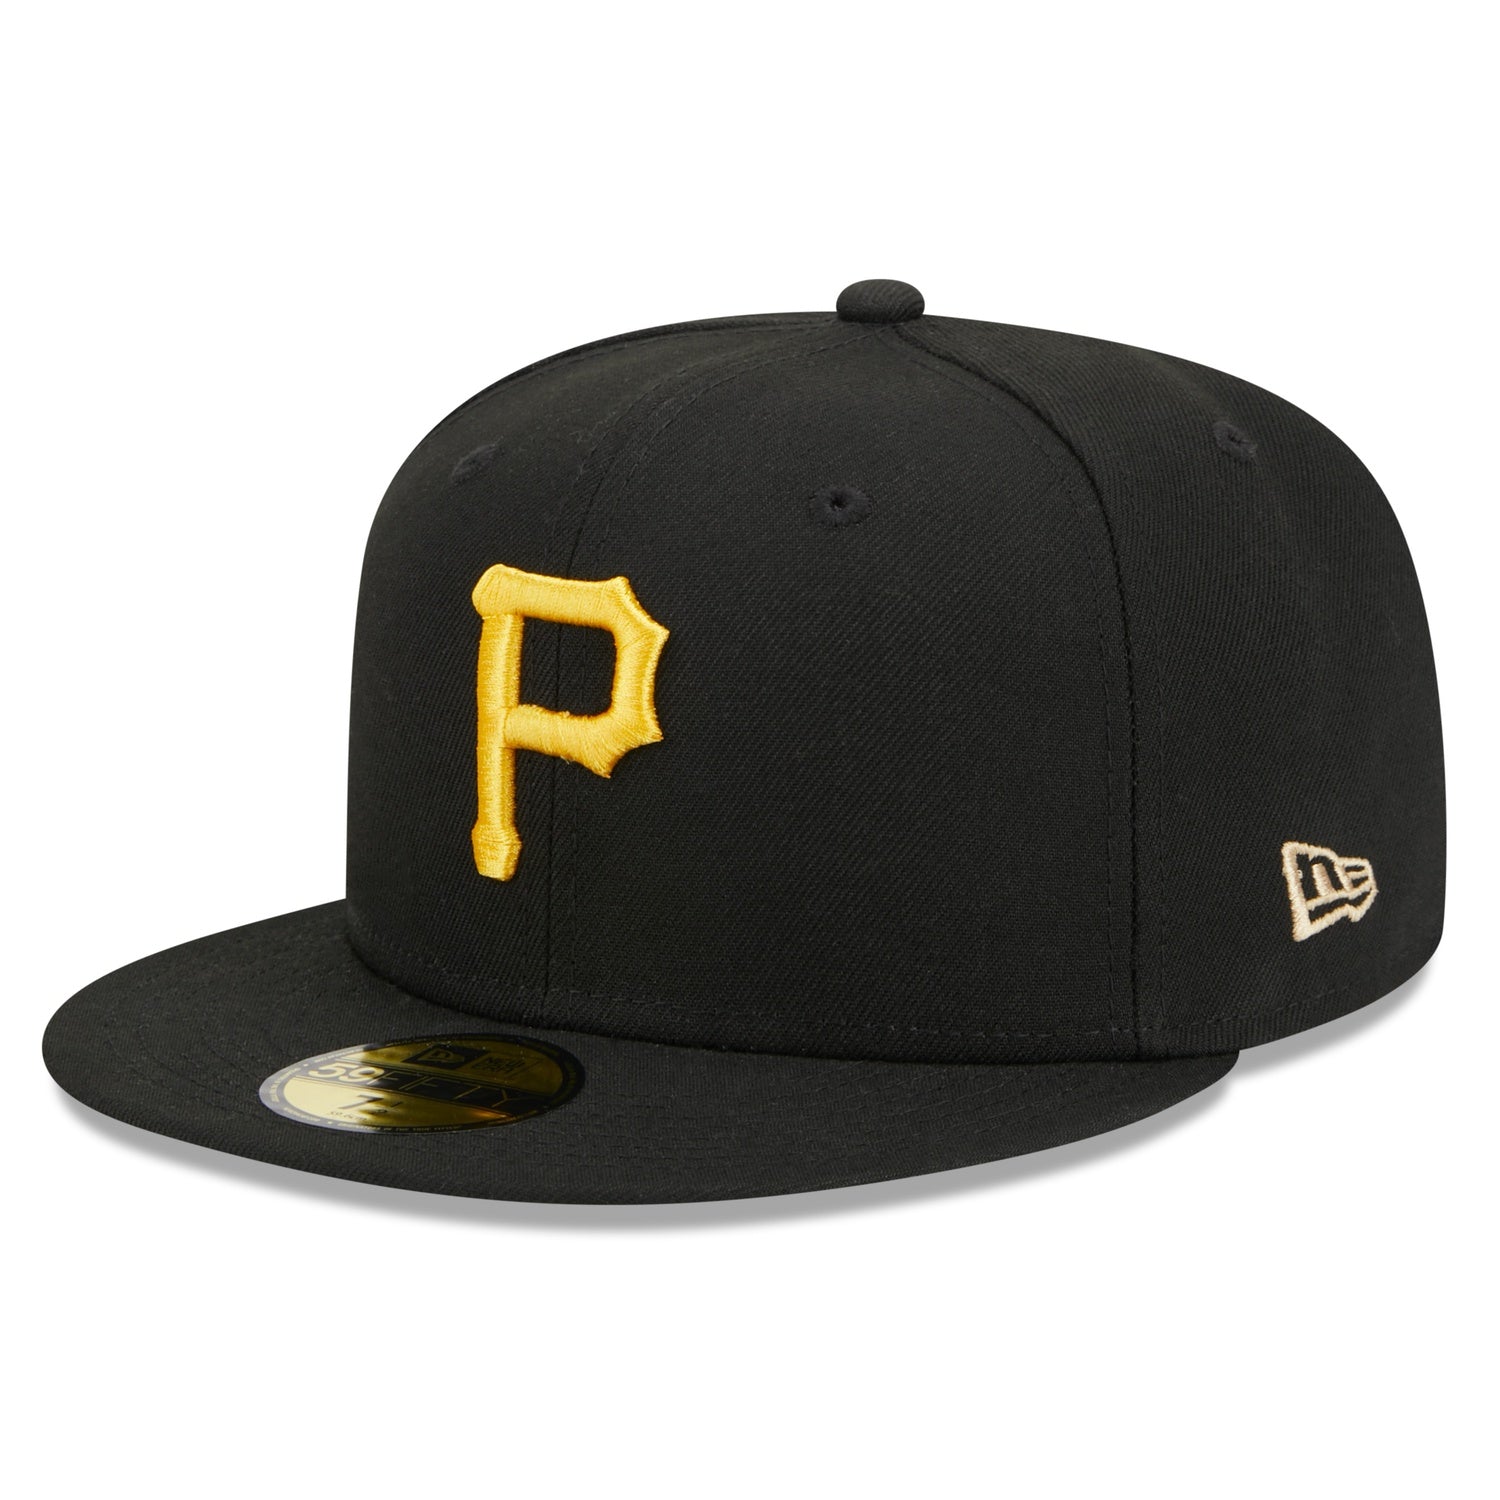 Red Pittsburgh Pirates 1925 World Series Side Patch Fitted Hat